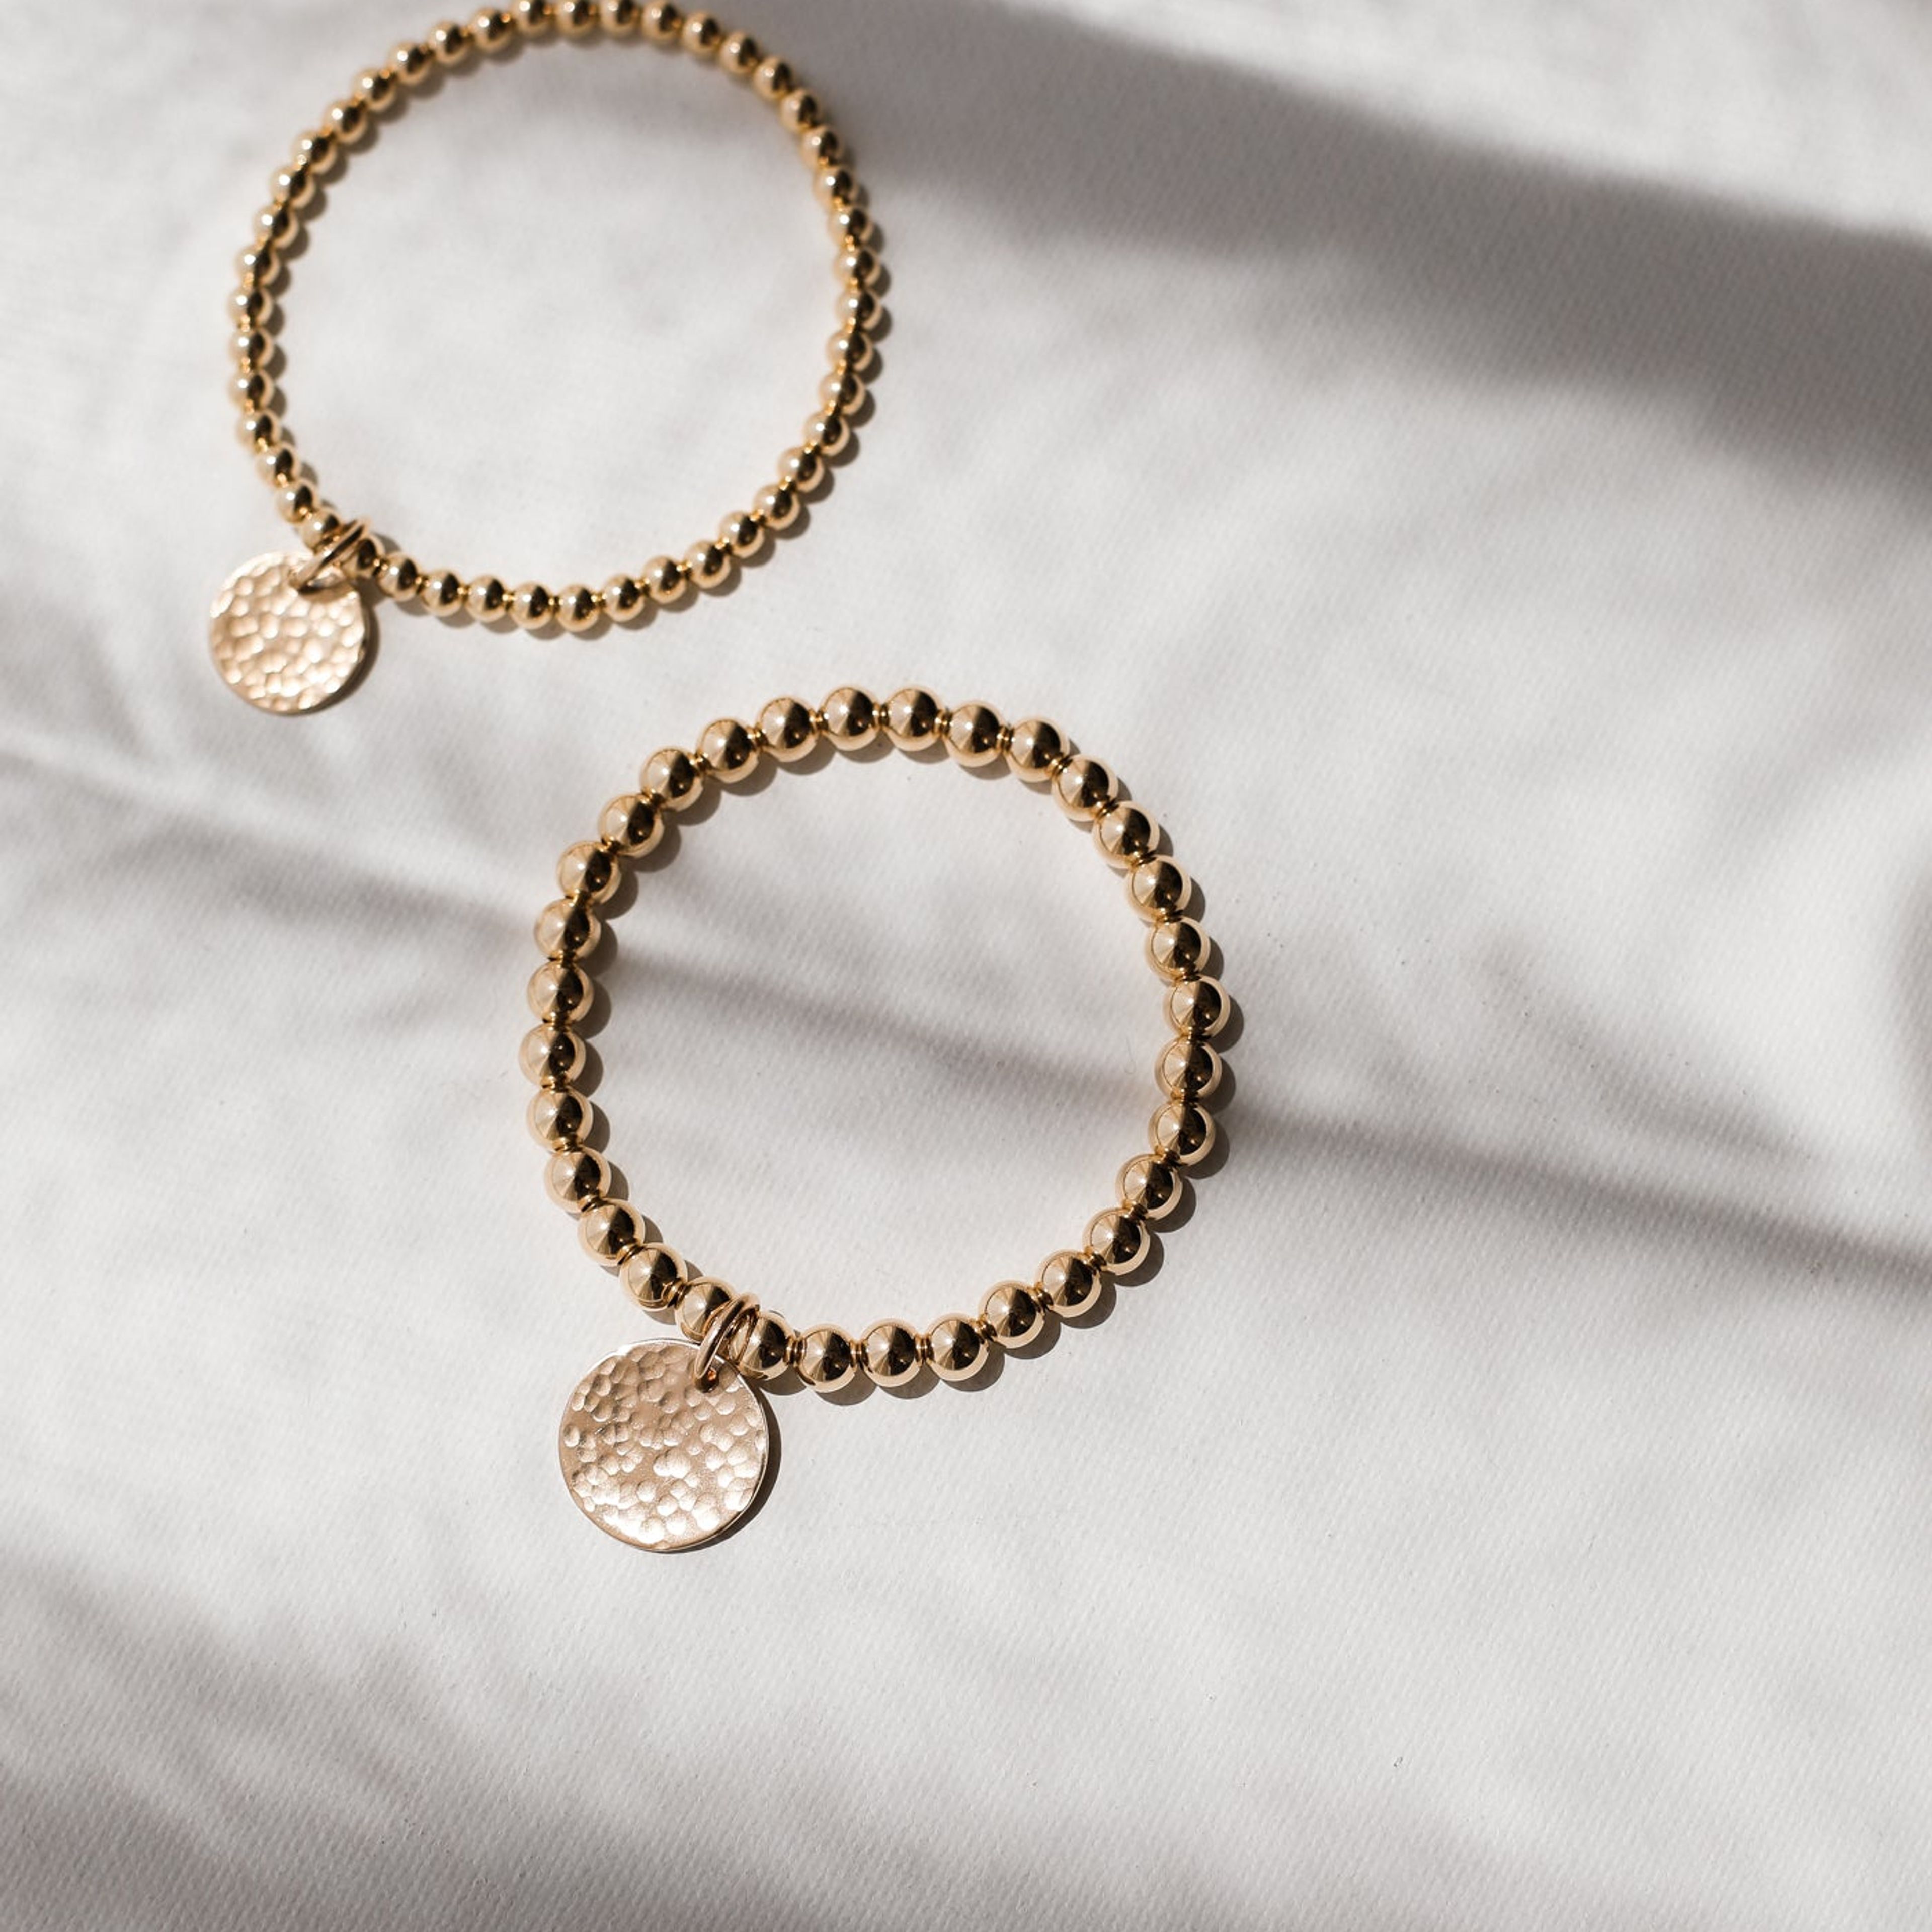 The Hammered Coin Beaded Bracelet - Gold